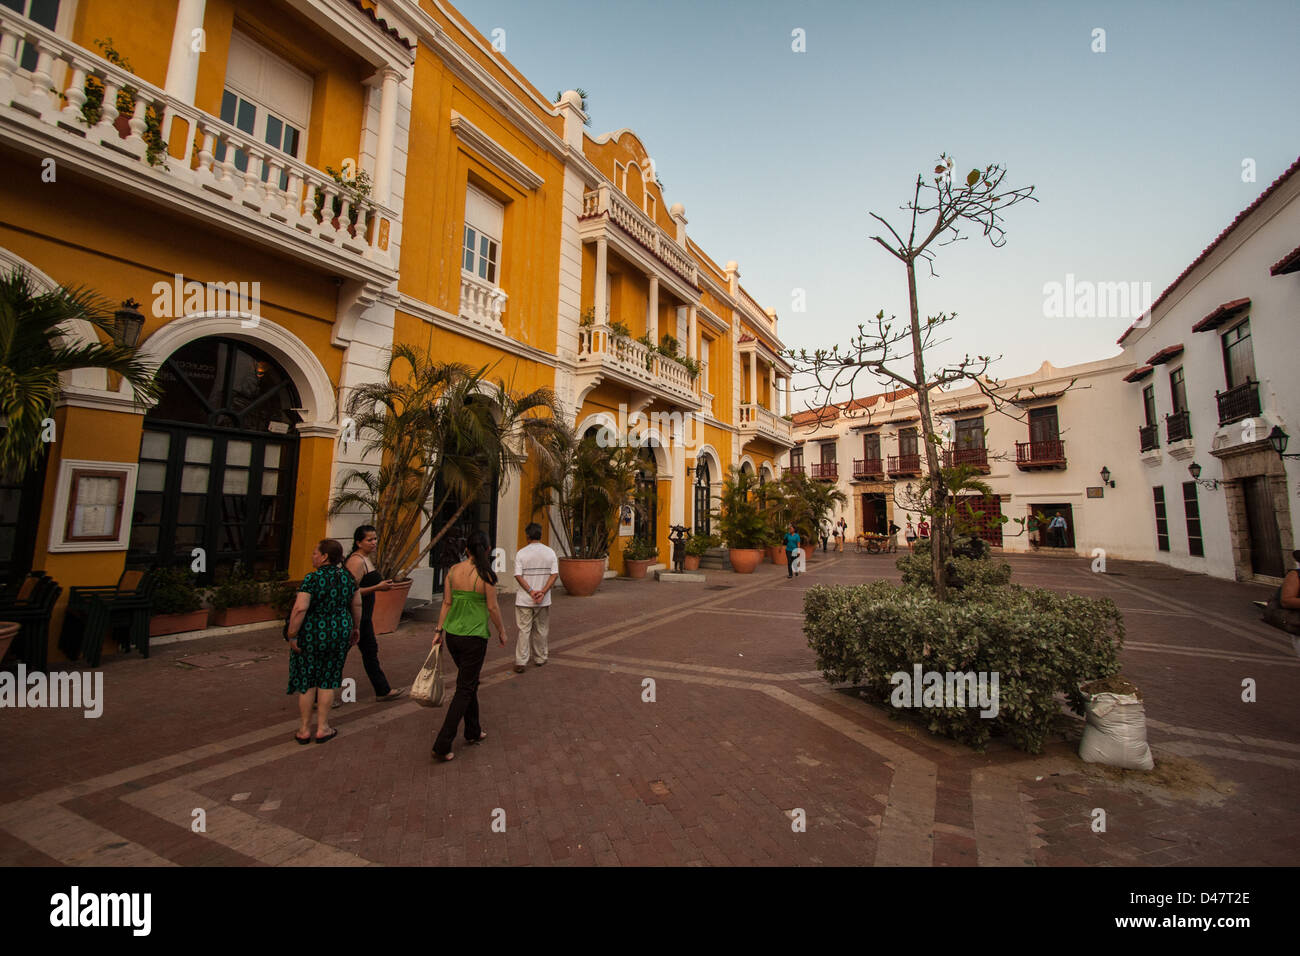 Picture taken in Cartagena, Colombia Stock Photo